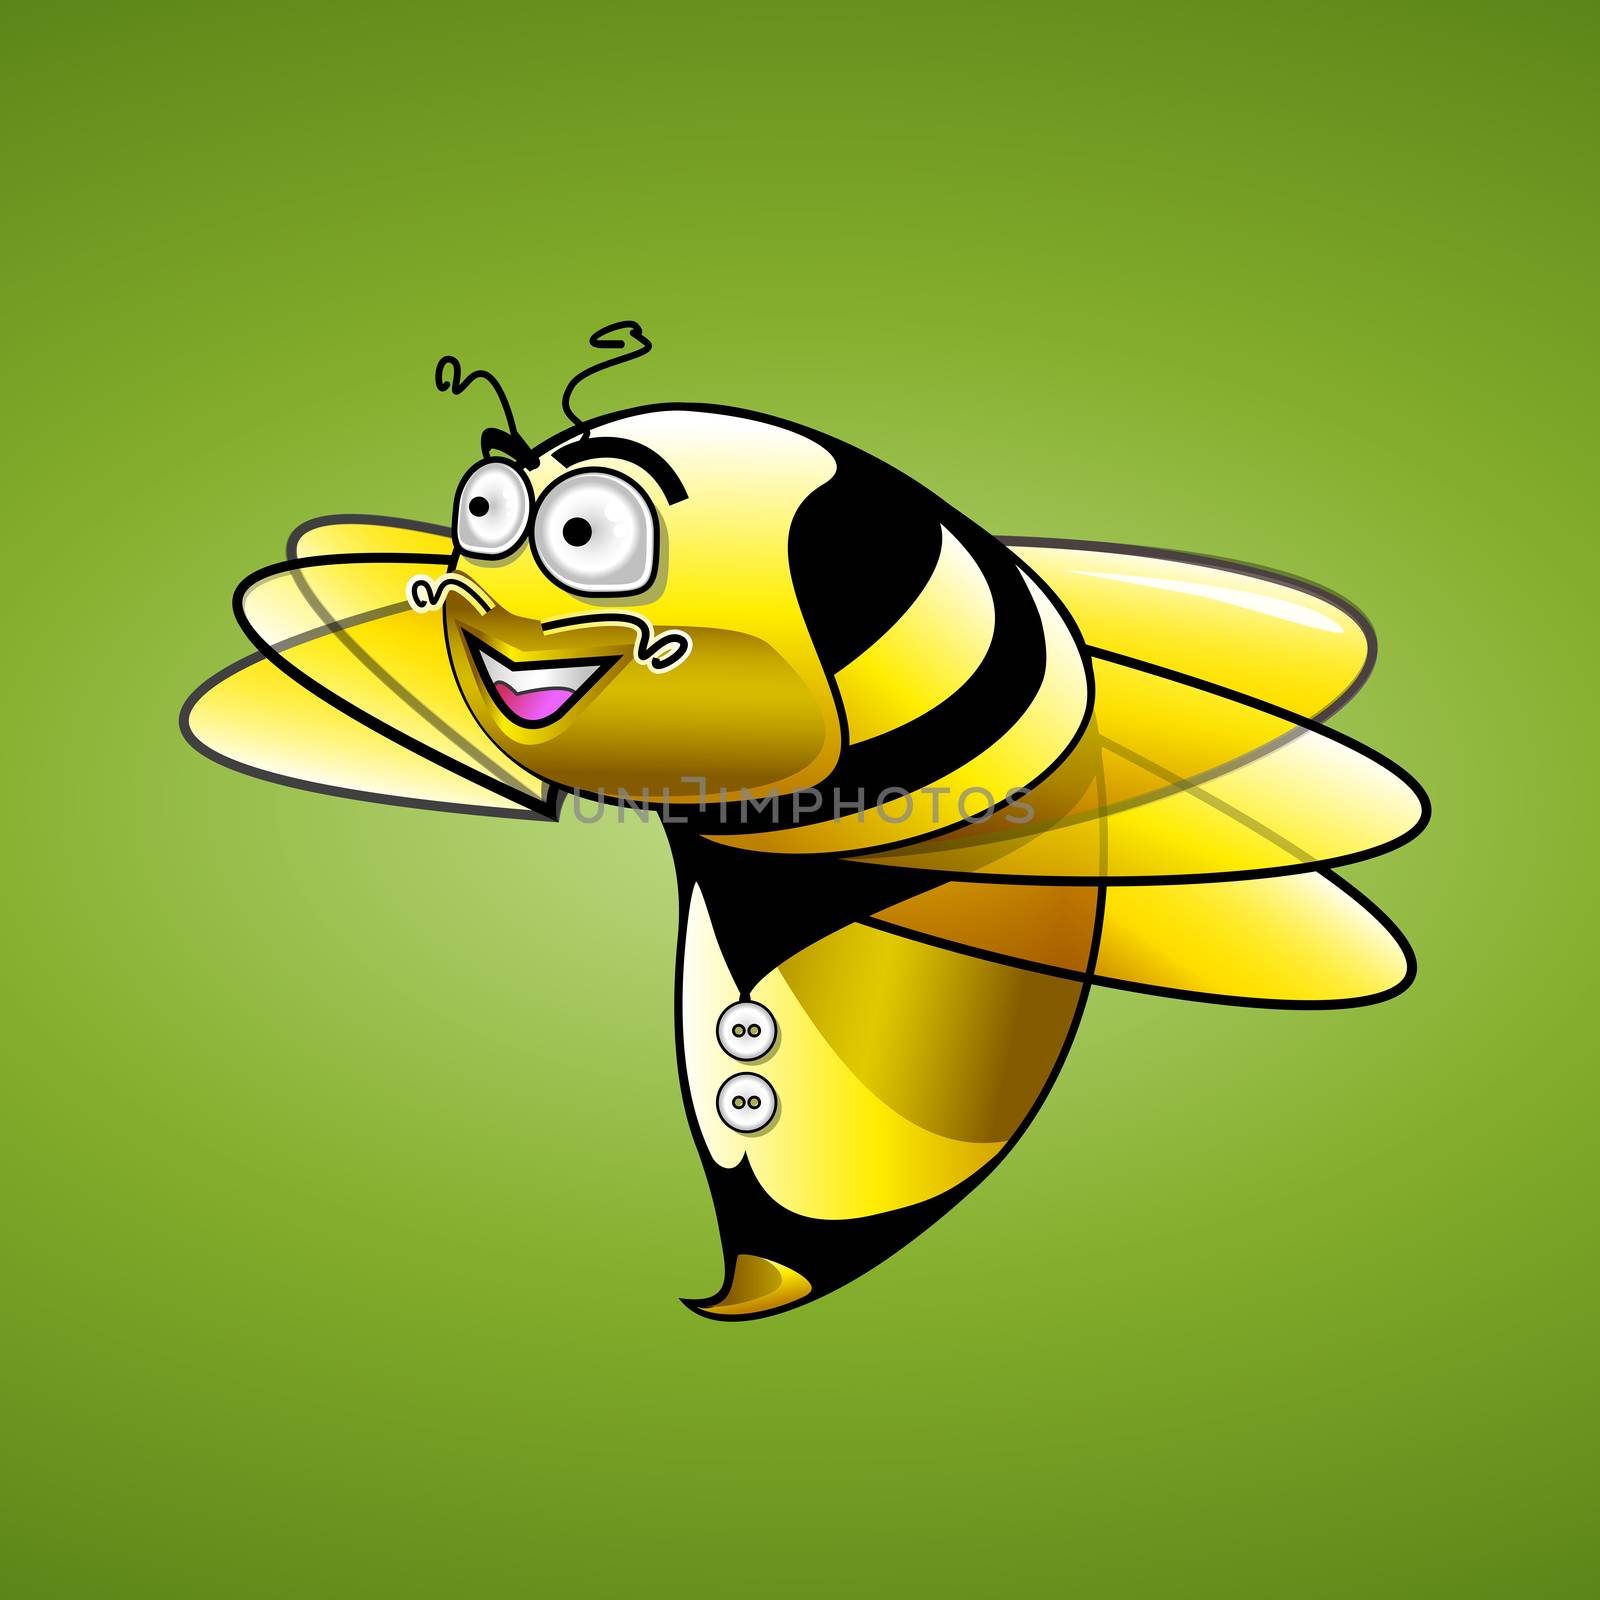 Bee Character drawing raster illustration